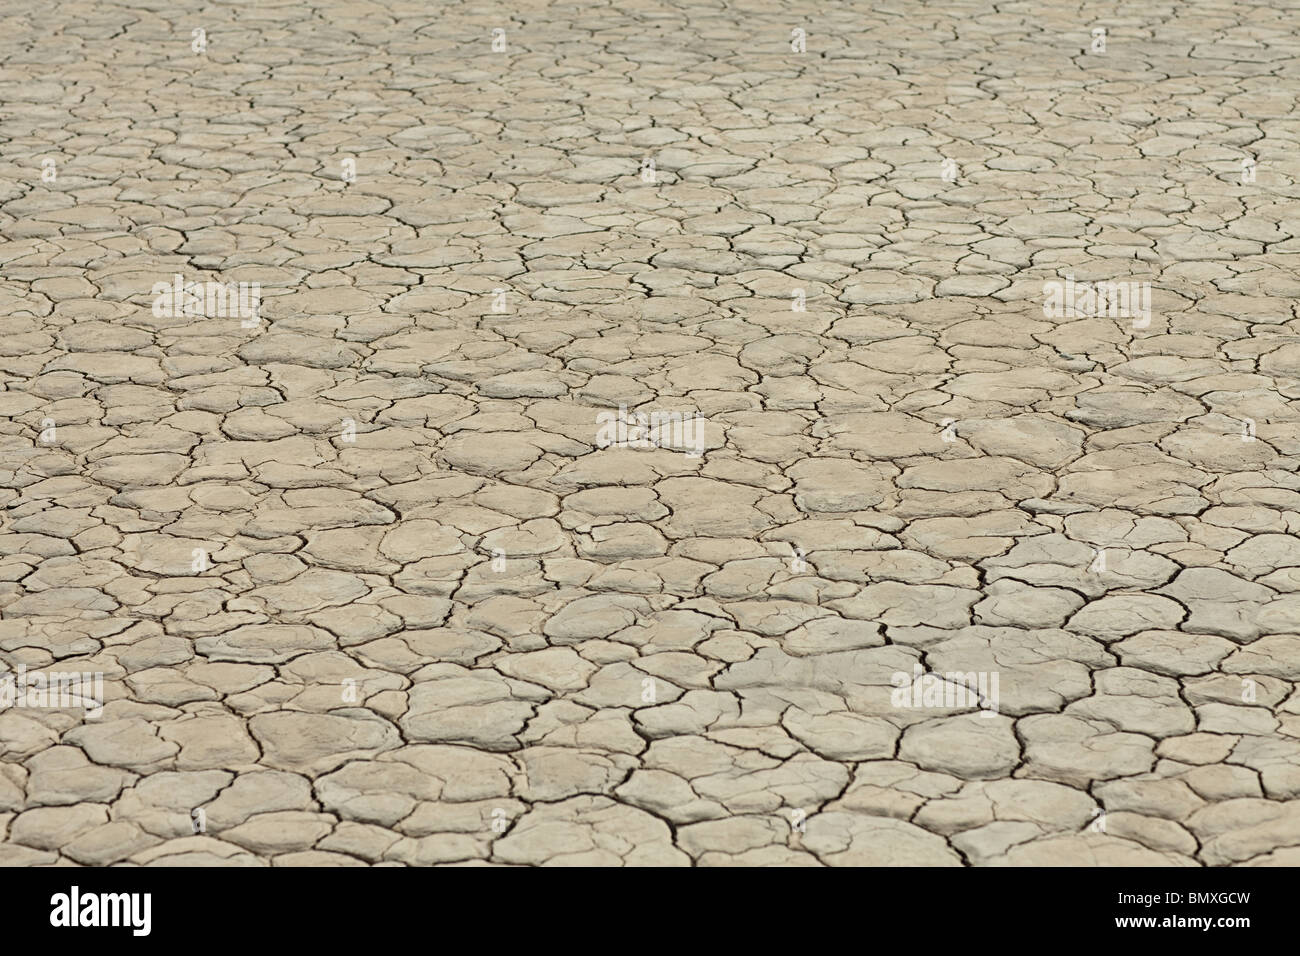 Cracked surface of dry lake bed Stock Photo